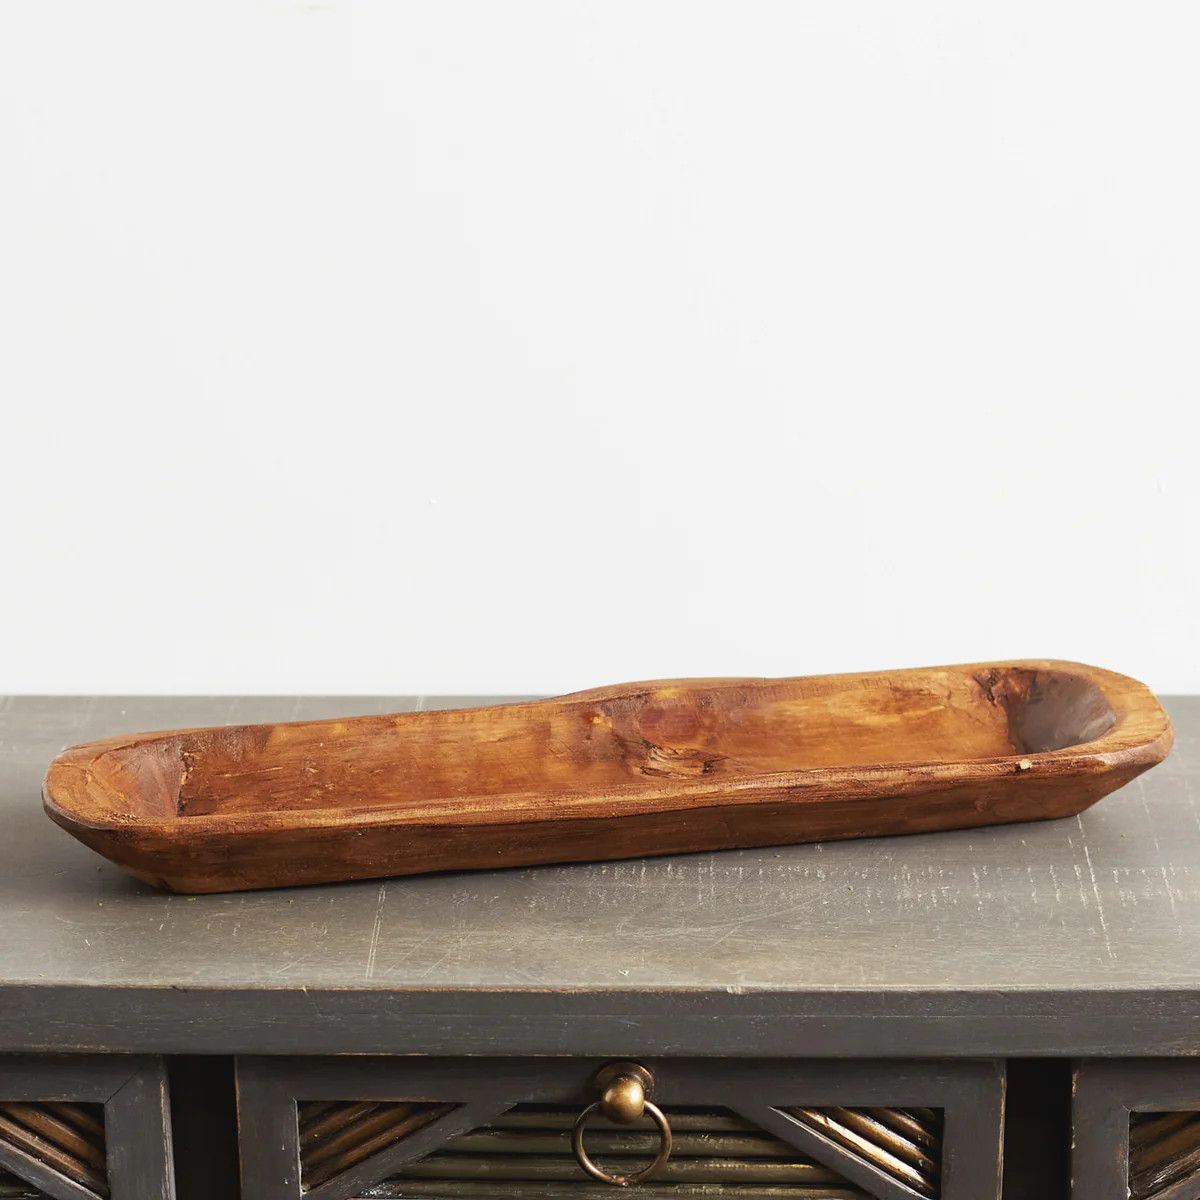 Hand Carved Spanish Oak Wood Bread Bowl Tray Centerpiece | Darby Creek Trading